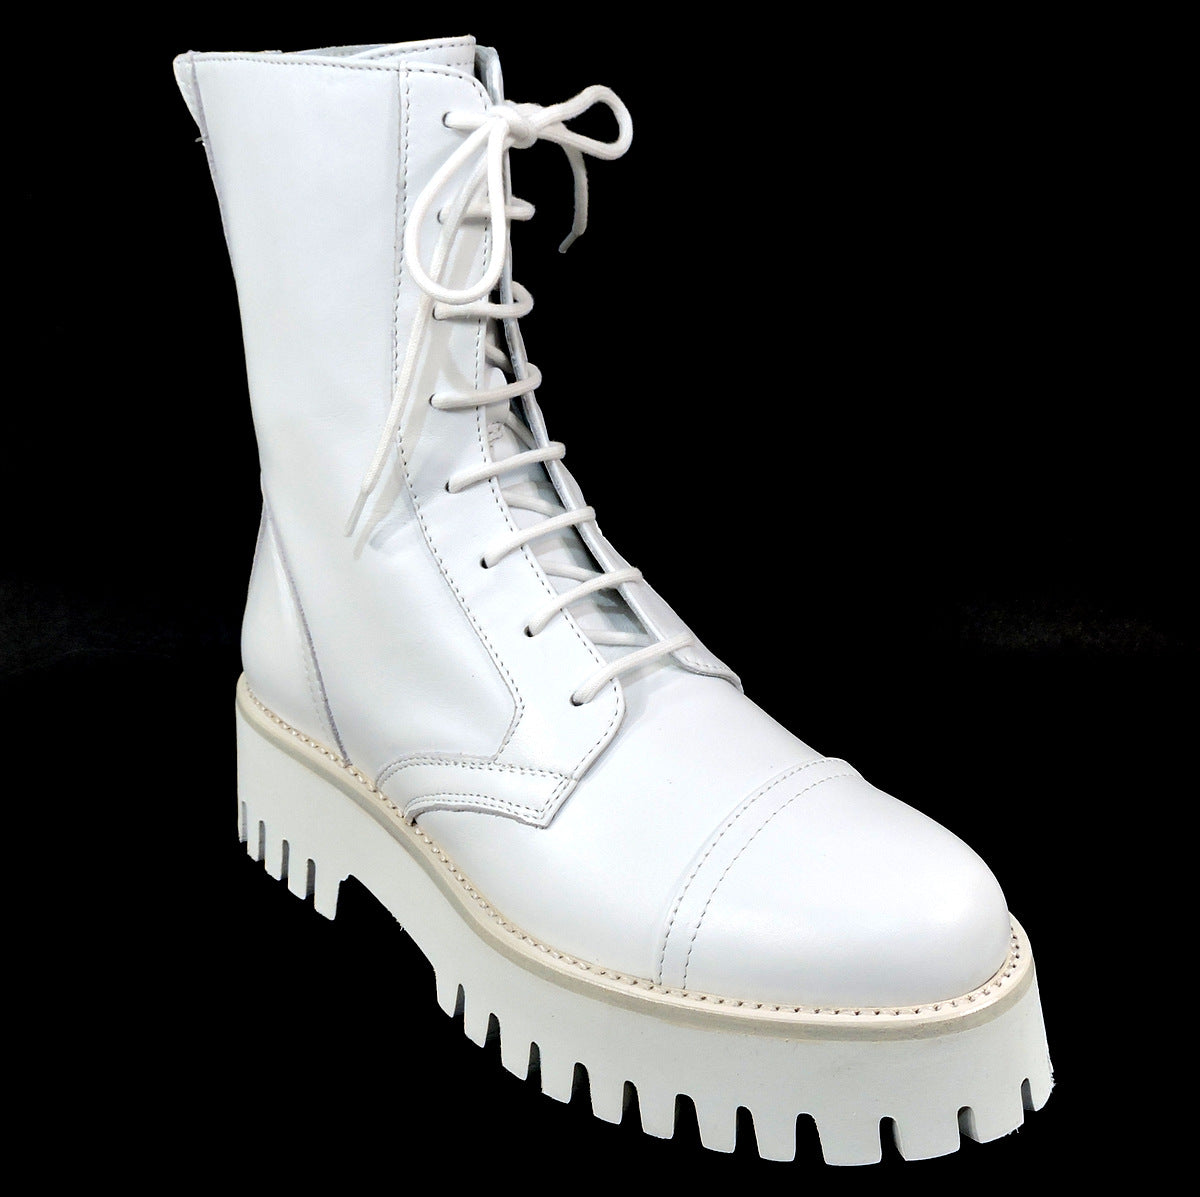 CASADEI 🇮🇹 WOMEN'S SOFT WHITE LEATHER COMFORT FASHION ANKLE BOOTIES BOUTIQUE